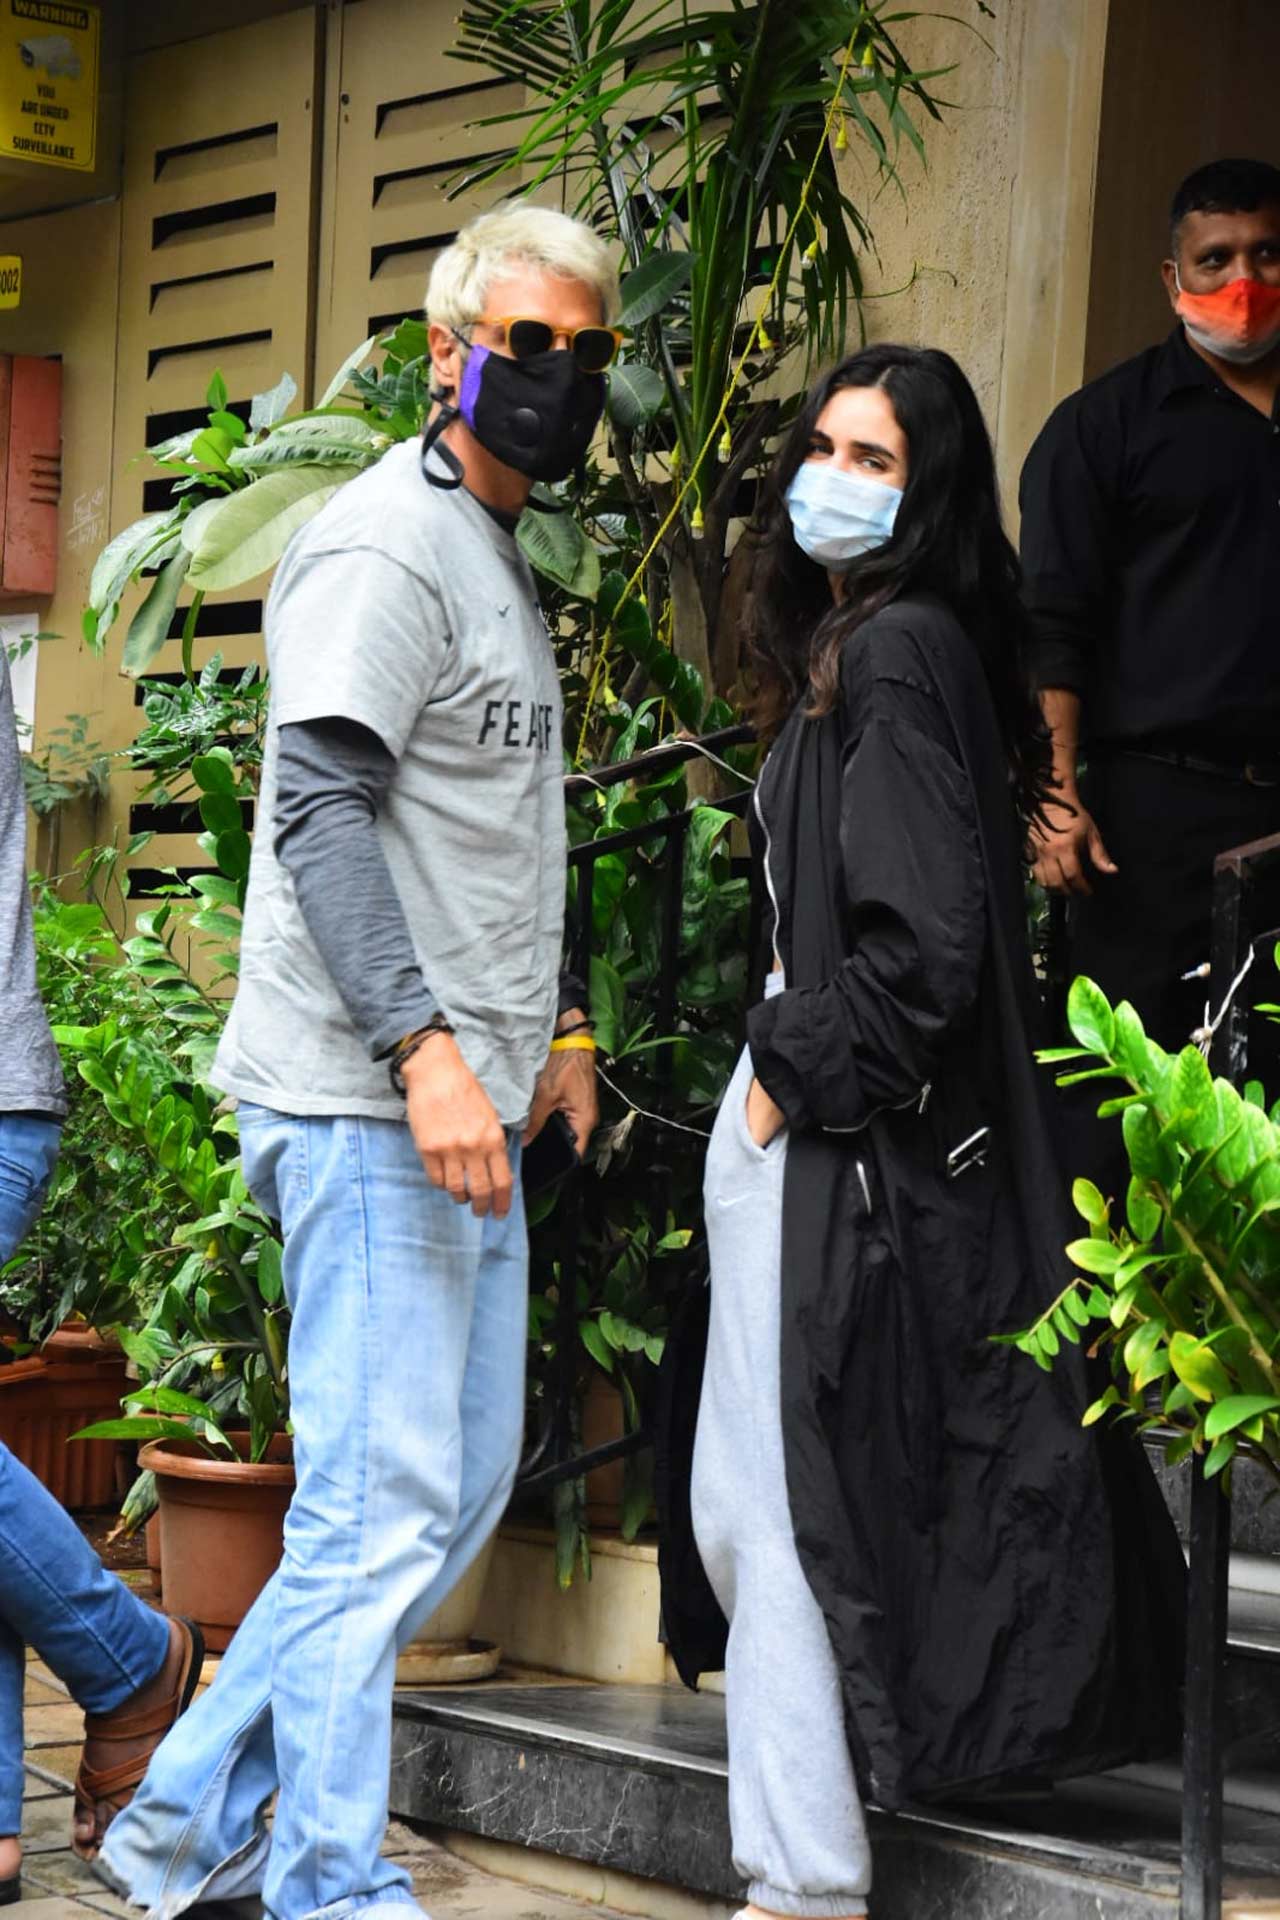 Arjun Rampal, Gabriella Demetriades were also spotted together in the city. After wrapping up his shoot for 'Dhaakad' in Budapest, actor Arjun Rampal headed to London to spend quality time with his elder daughter Mahikaa. Arjun shared a glimpse of him meeting Mahikaa and her classmates. 